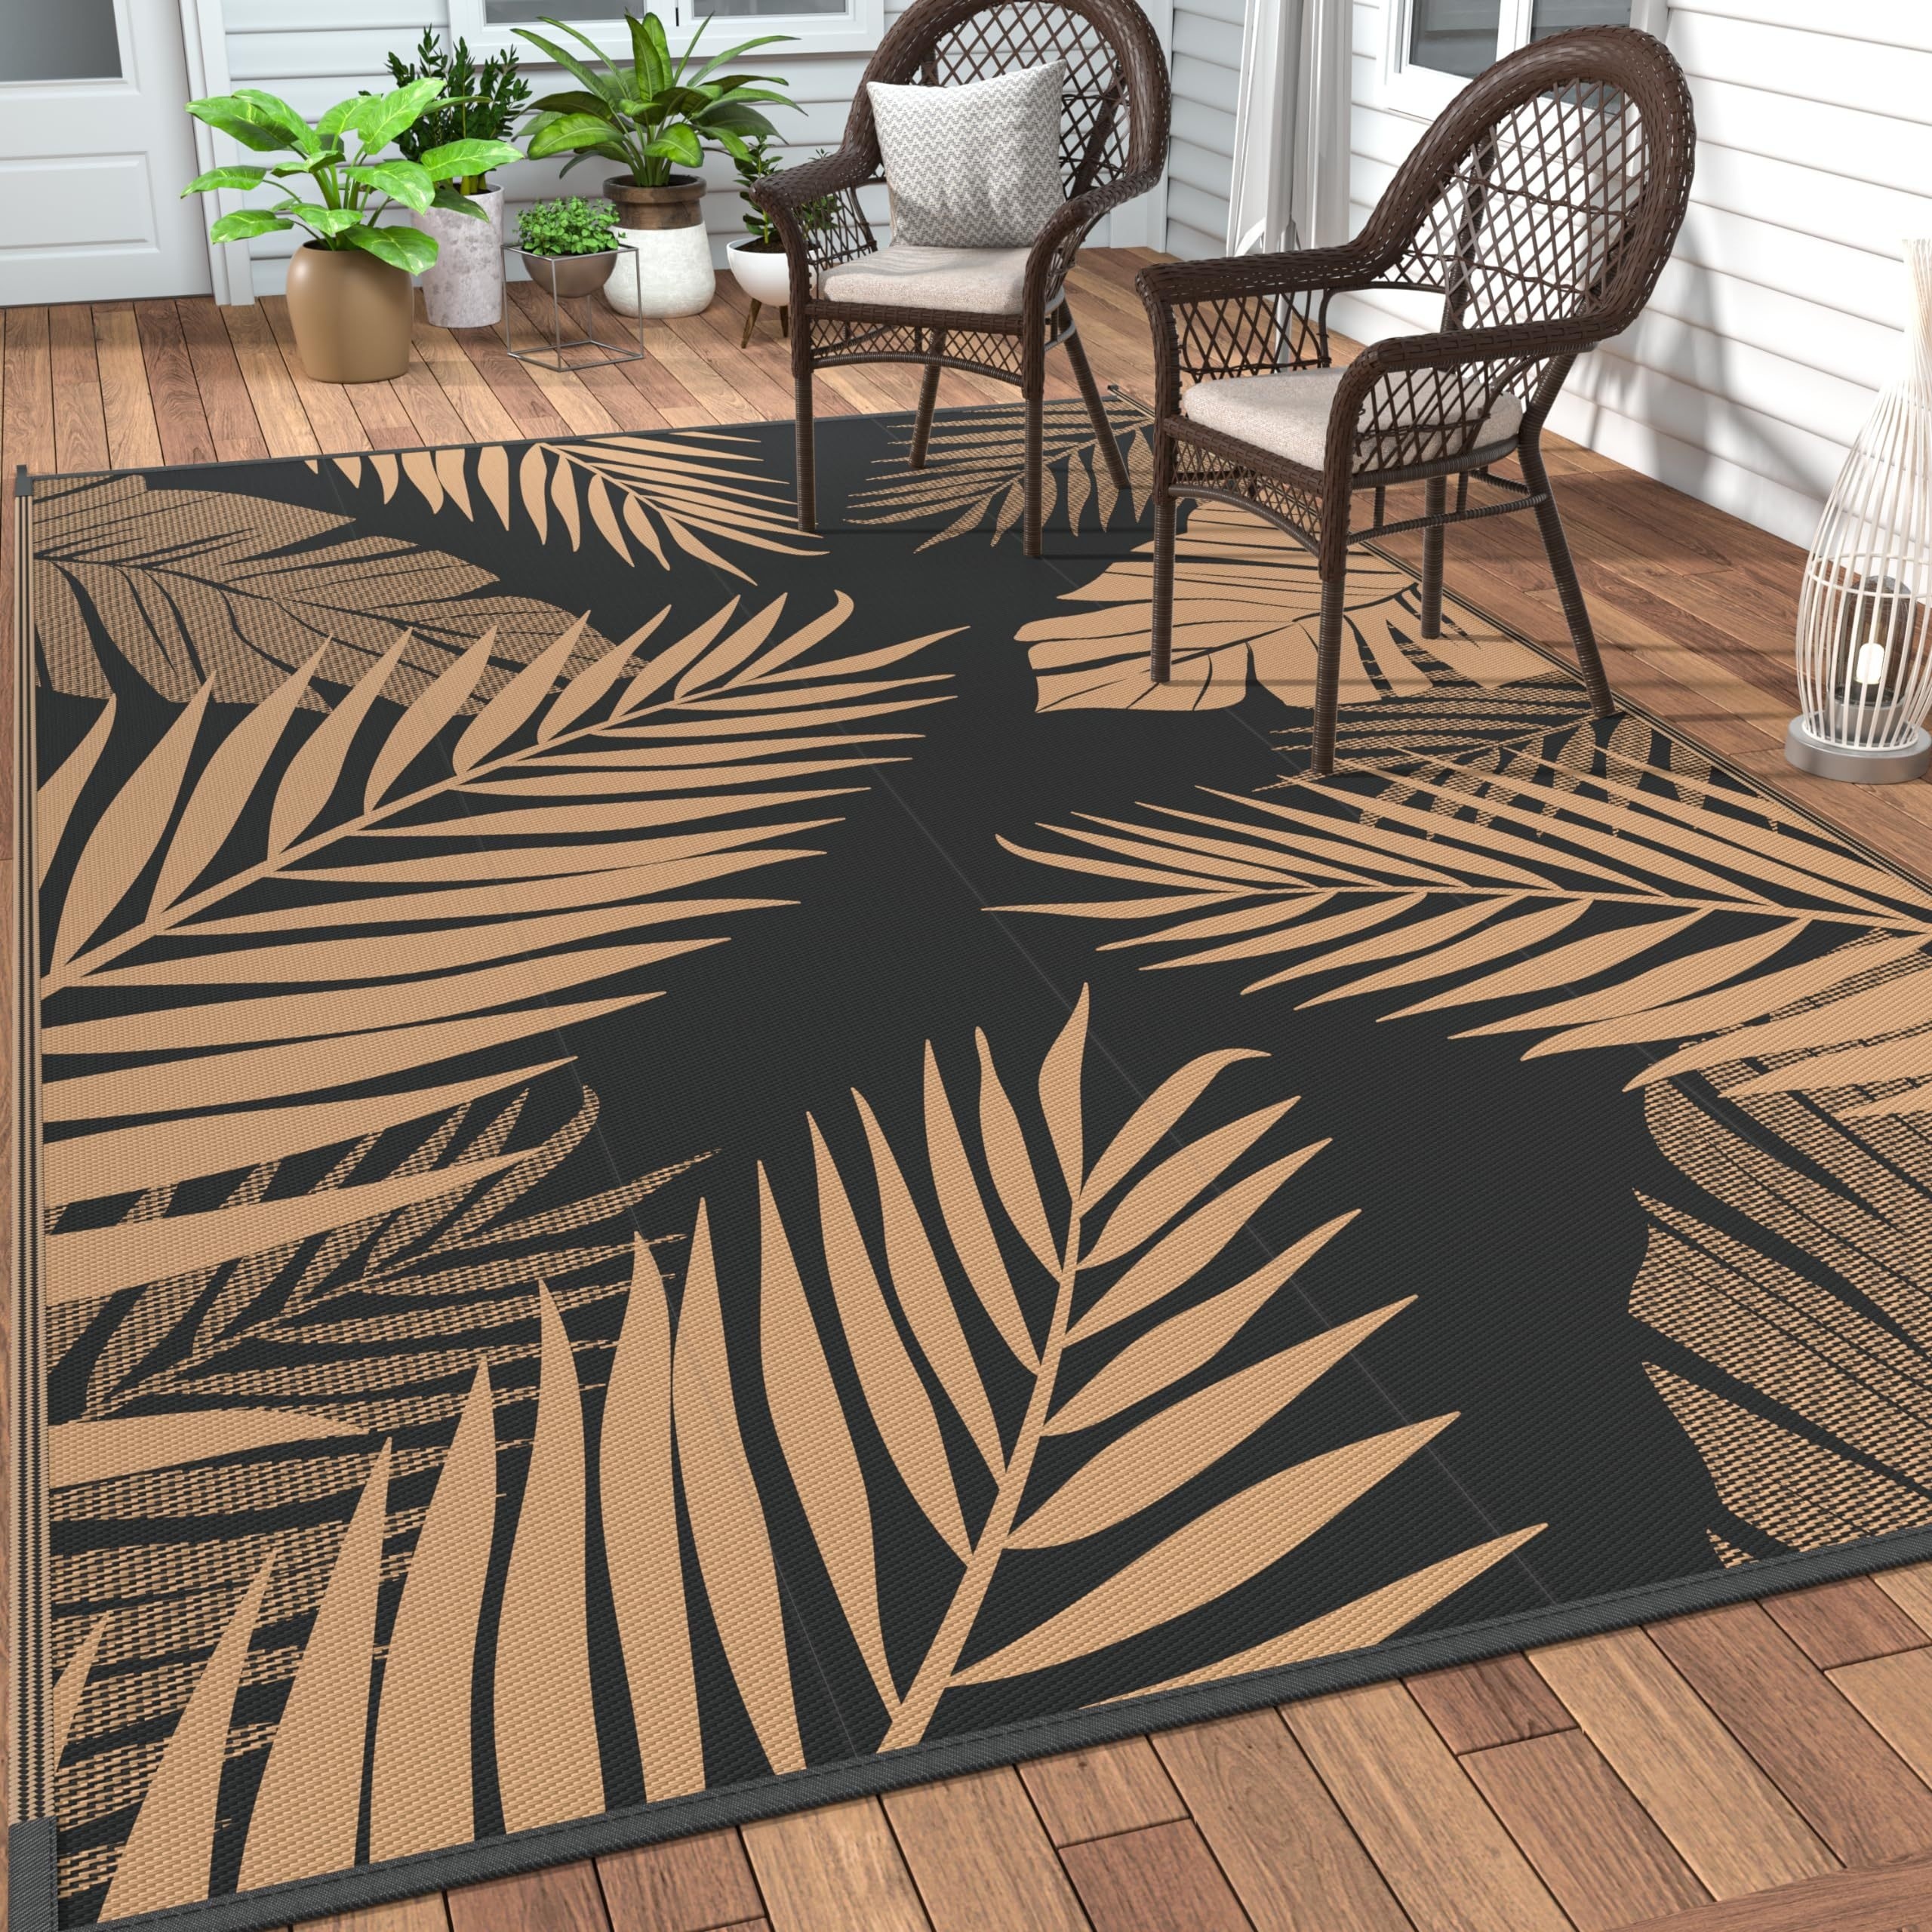 

Outdoor Rug Waterproof For Patios Clearance, Reversible Outdoor Plastic Straw Camping Rug Carpet, Large Area Rugs Mats For Rv, Camper, Deck, Balcony, Porch, Beach, Picnic, Black&brown